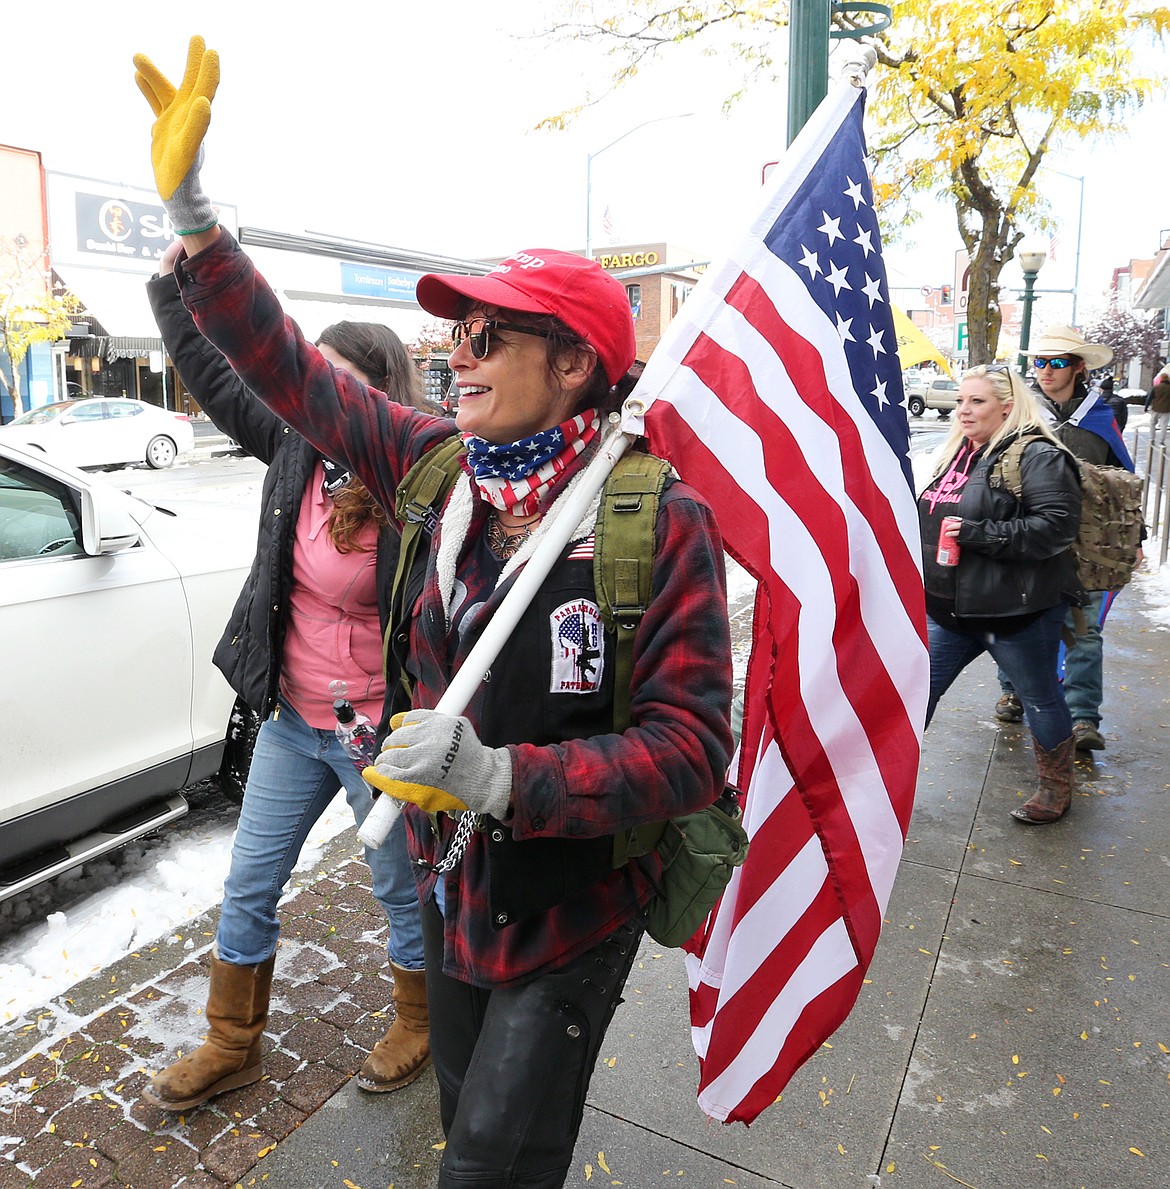 A woman who said she lives in Spokane and goes by "Butterfly" holds a flag on Sherman Avenue Saturday during the rally for President Donald Trump.